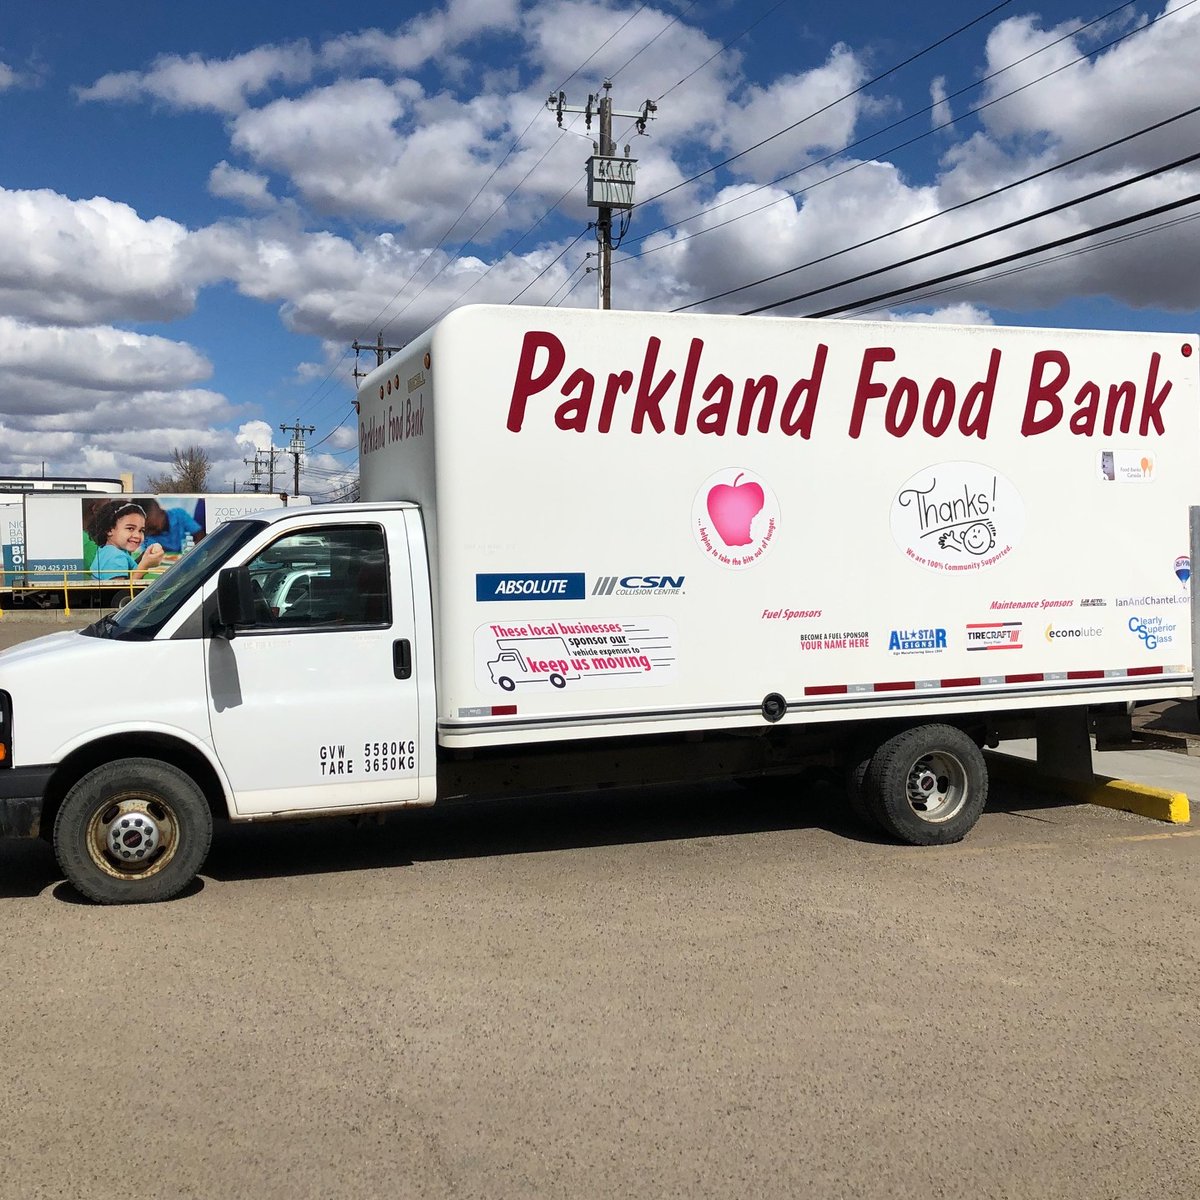 We spotted our friends from the Parkland Food Bank during their recent stop at our main warehouse.

We just wanted to say HI and thank you for doing what you do to help others! #yeg #Edmonton #YegFoodBank #FeedYeg #CommunitySupport #ParklandCounty #SpruceGrove @ParklndFoodBank